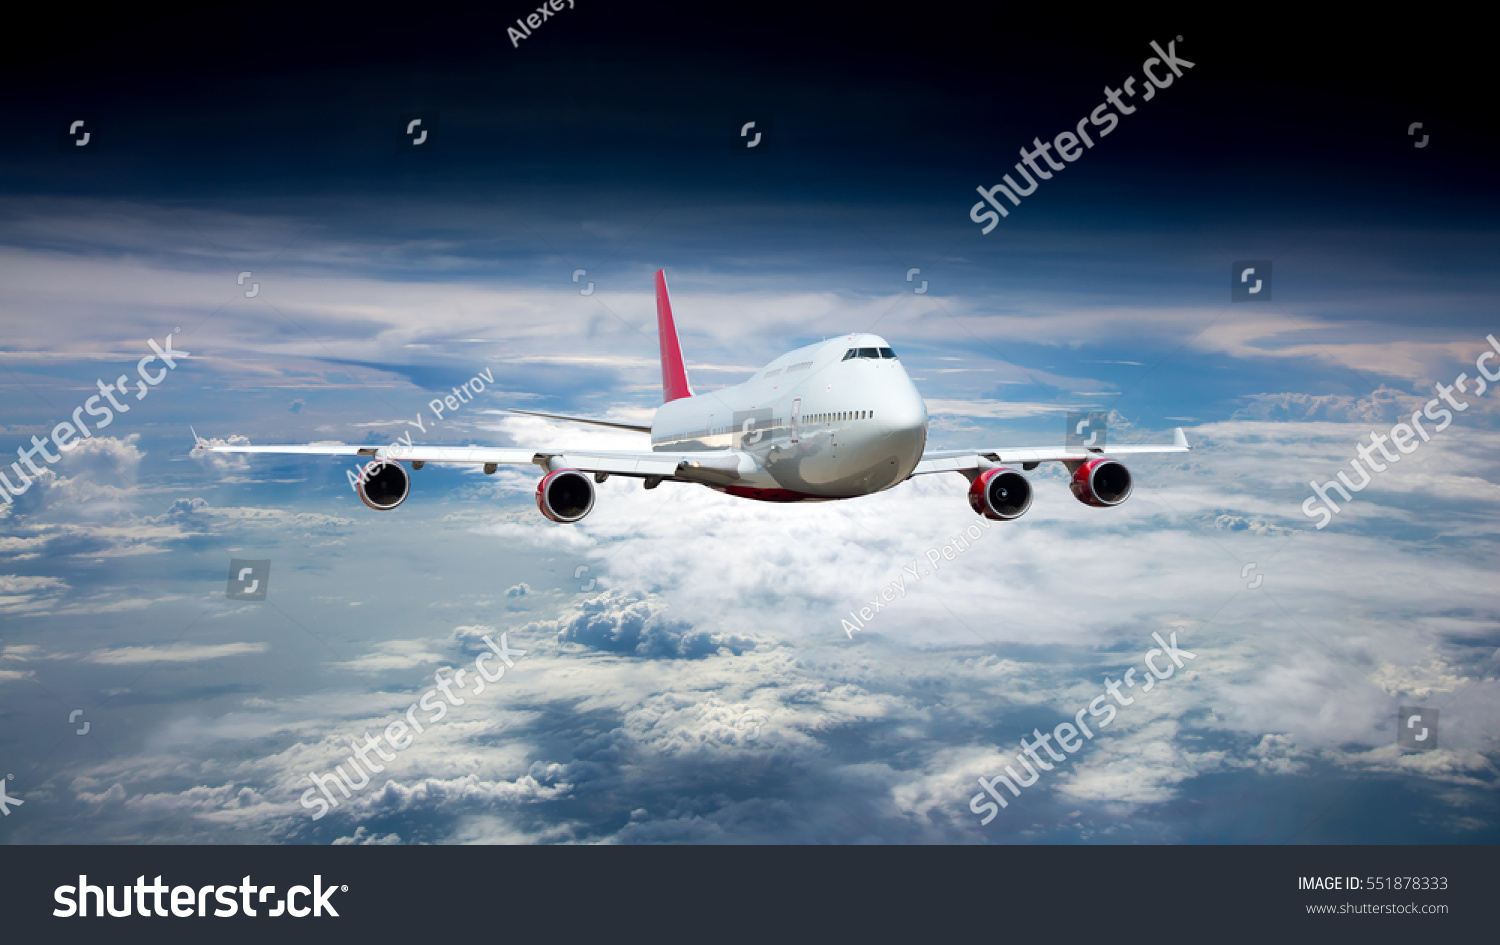 White passenger jet plane in the blue sky.  Aircraft flying high through the clouds. Airplane front view. #551878333